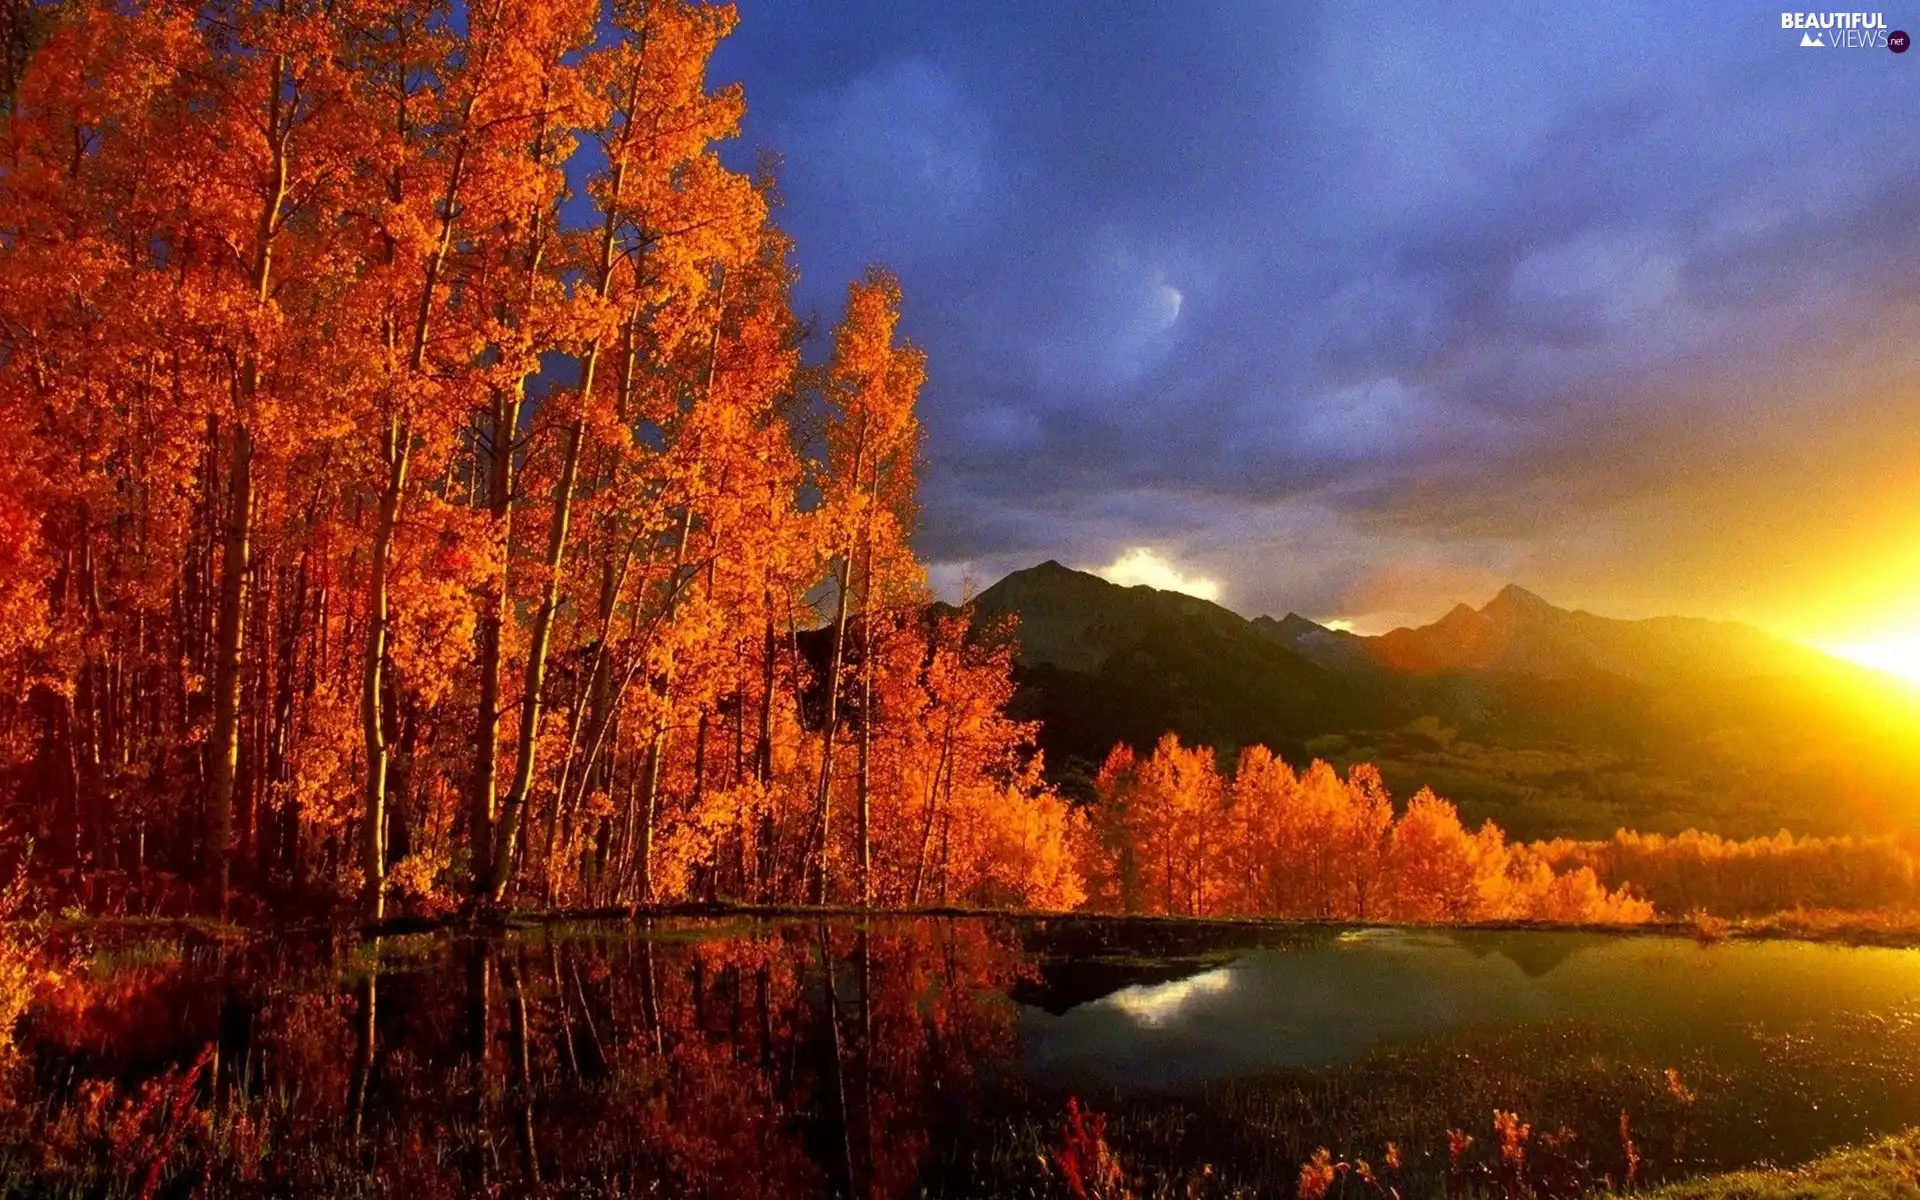 viewes, lakes, Sunsets, sun, Mountains, trees